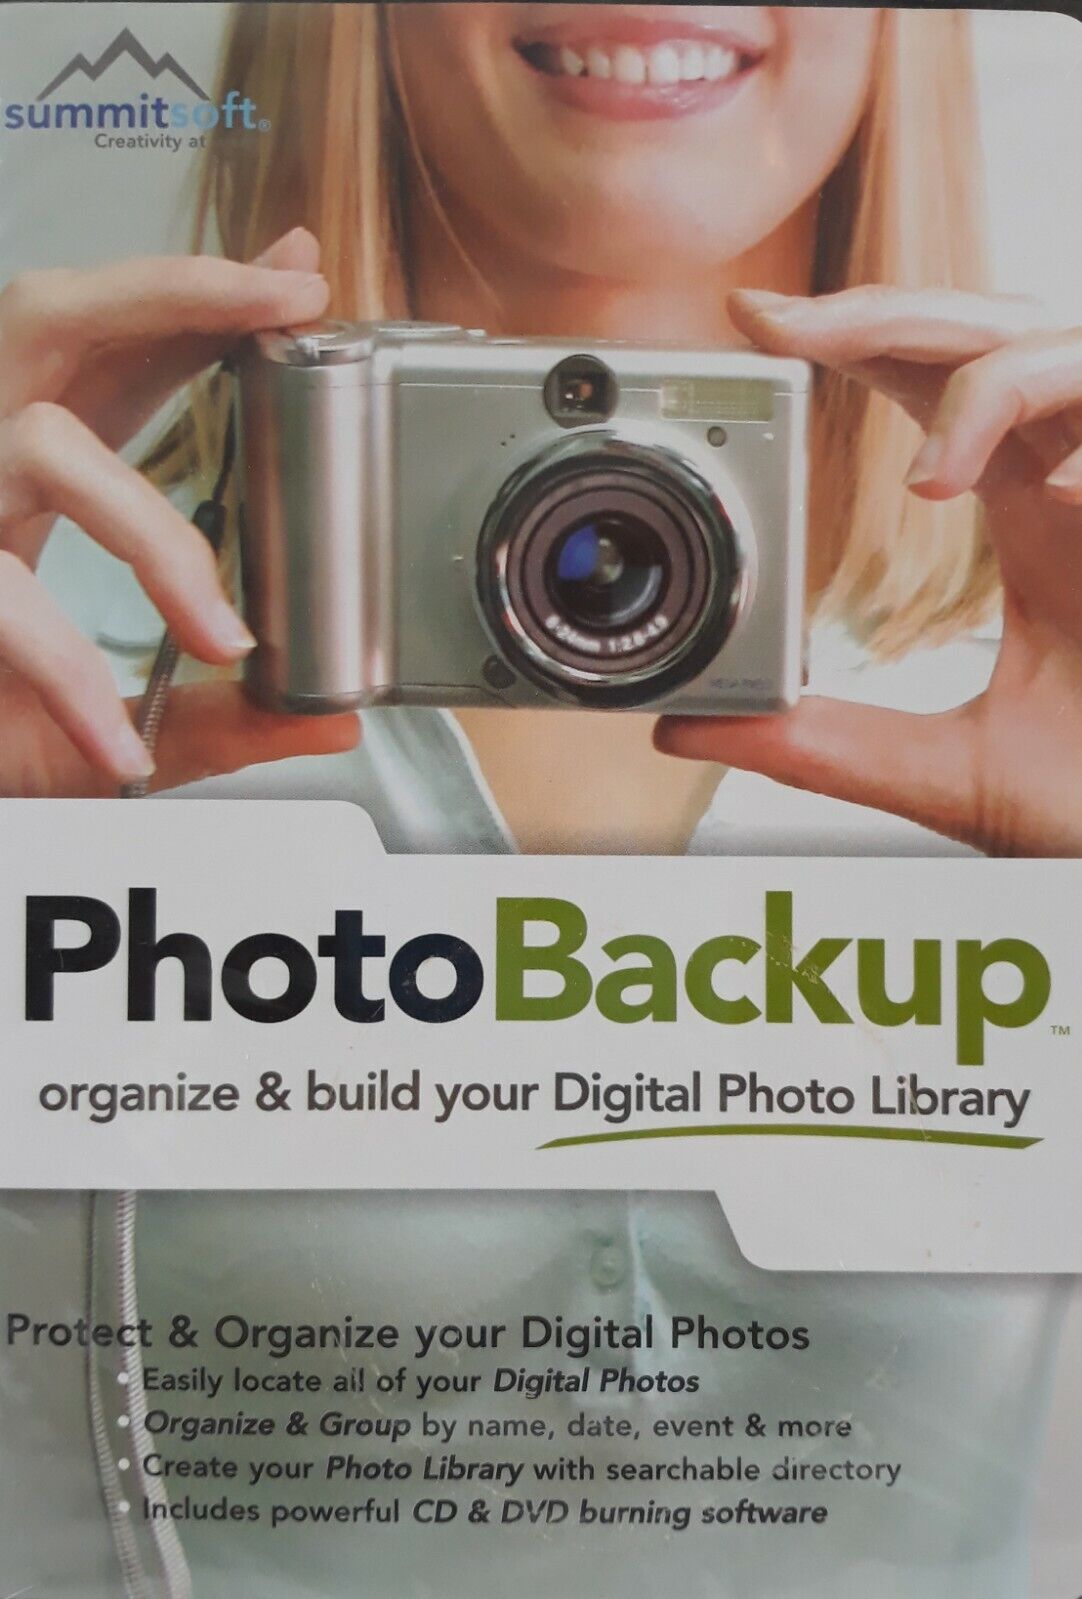 Photo Backup CD & DVD Burning Software for PC - Organize Your Digital Library